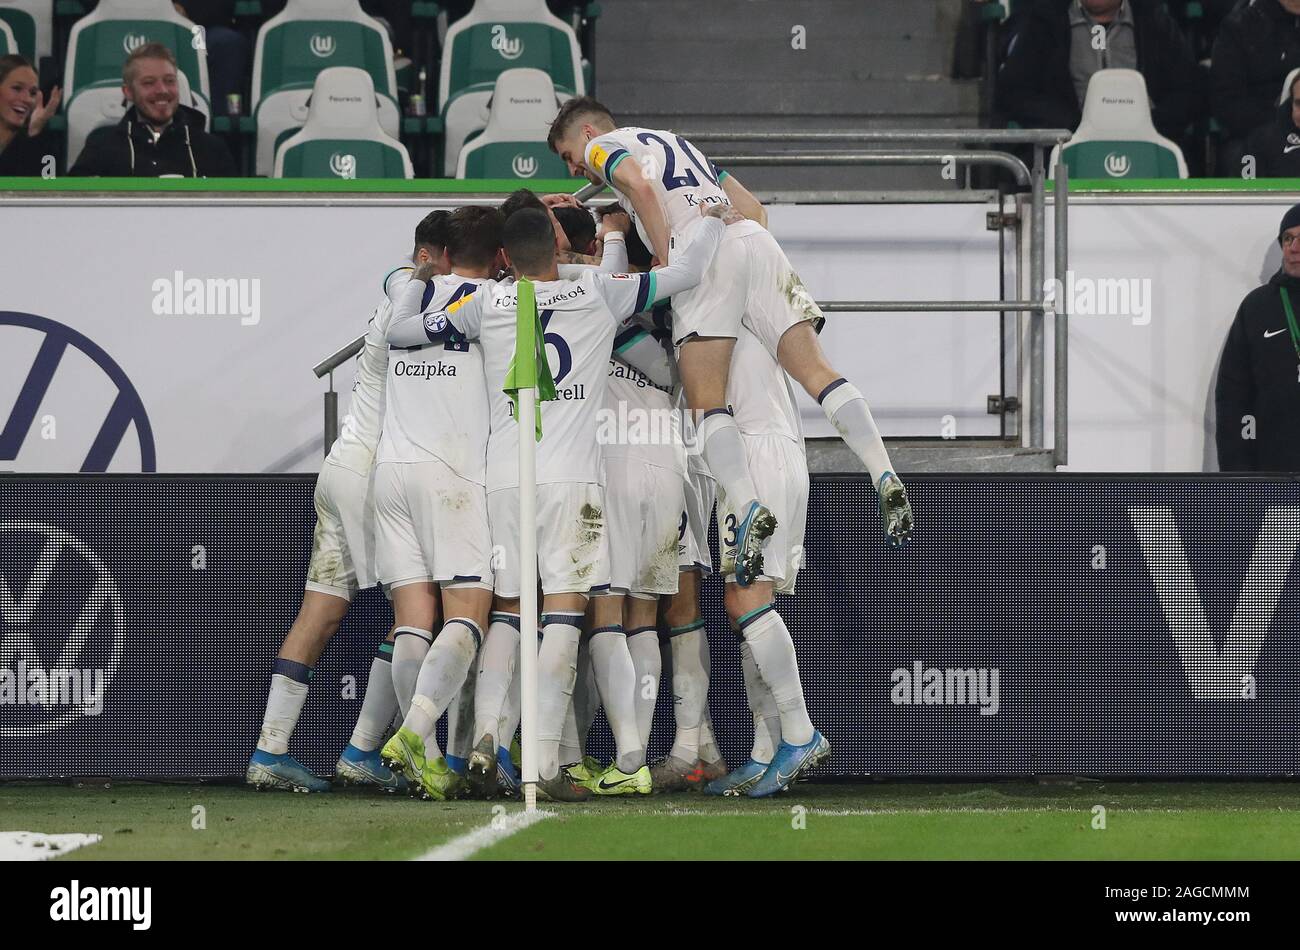 Vfl wolfsburg fc schalke 04 2020 hi-res stock photography and images - Alamy